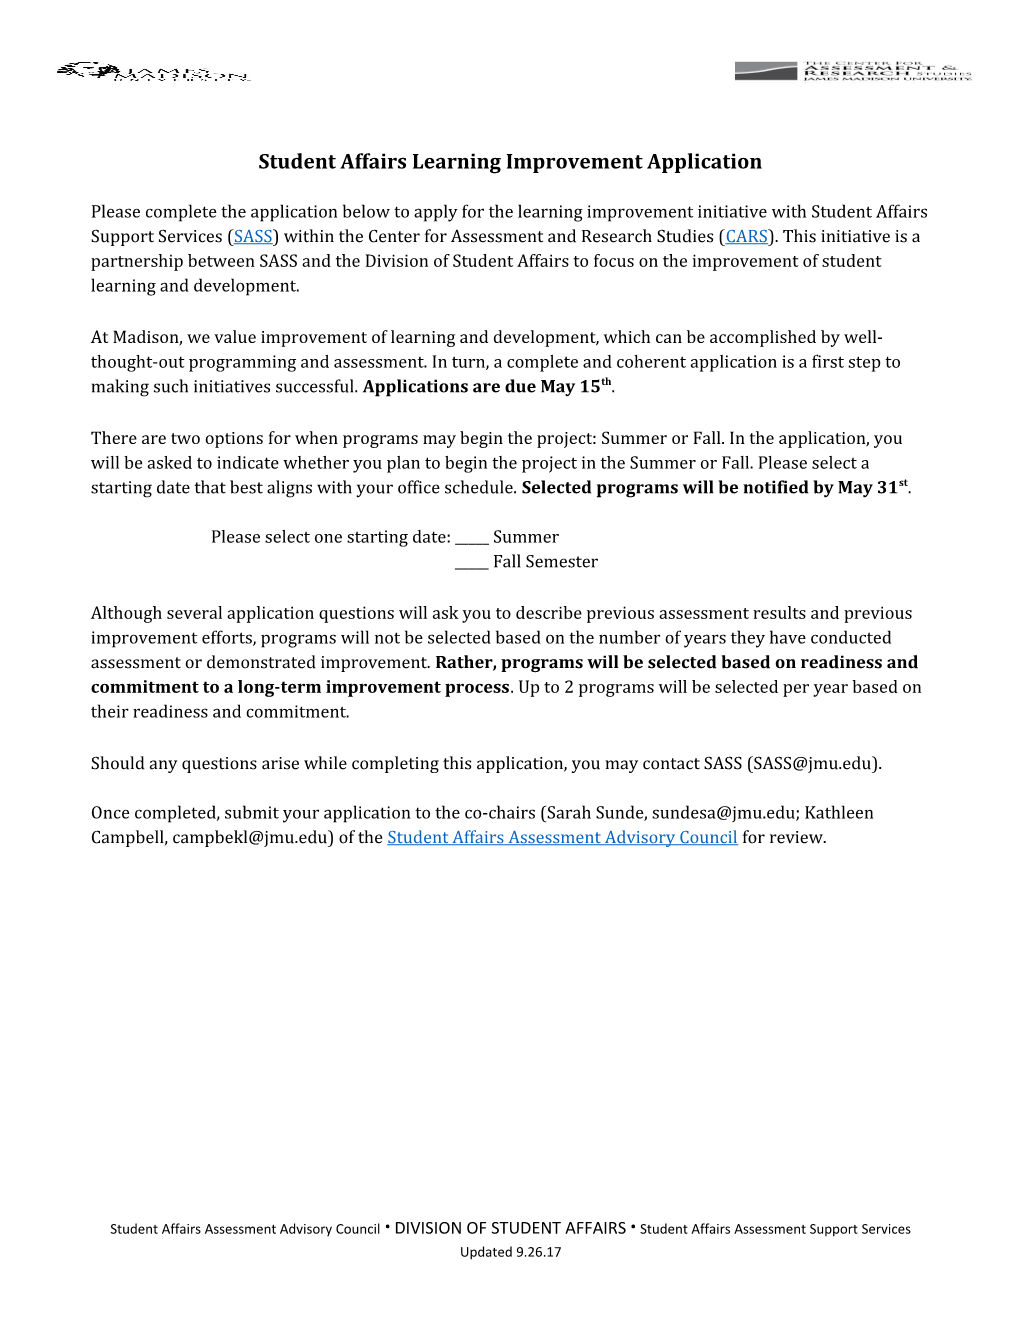 Student Affairs Learning Improvement Application